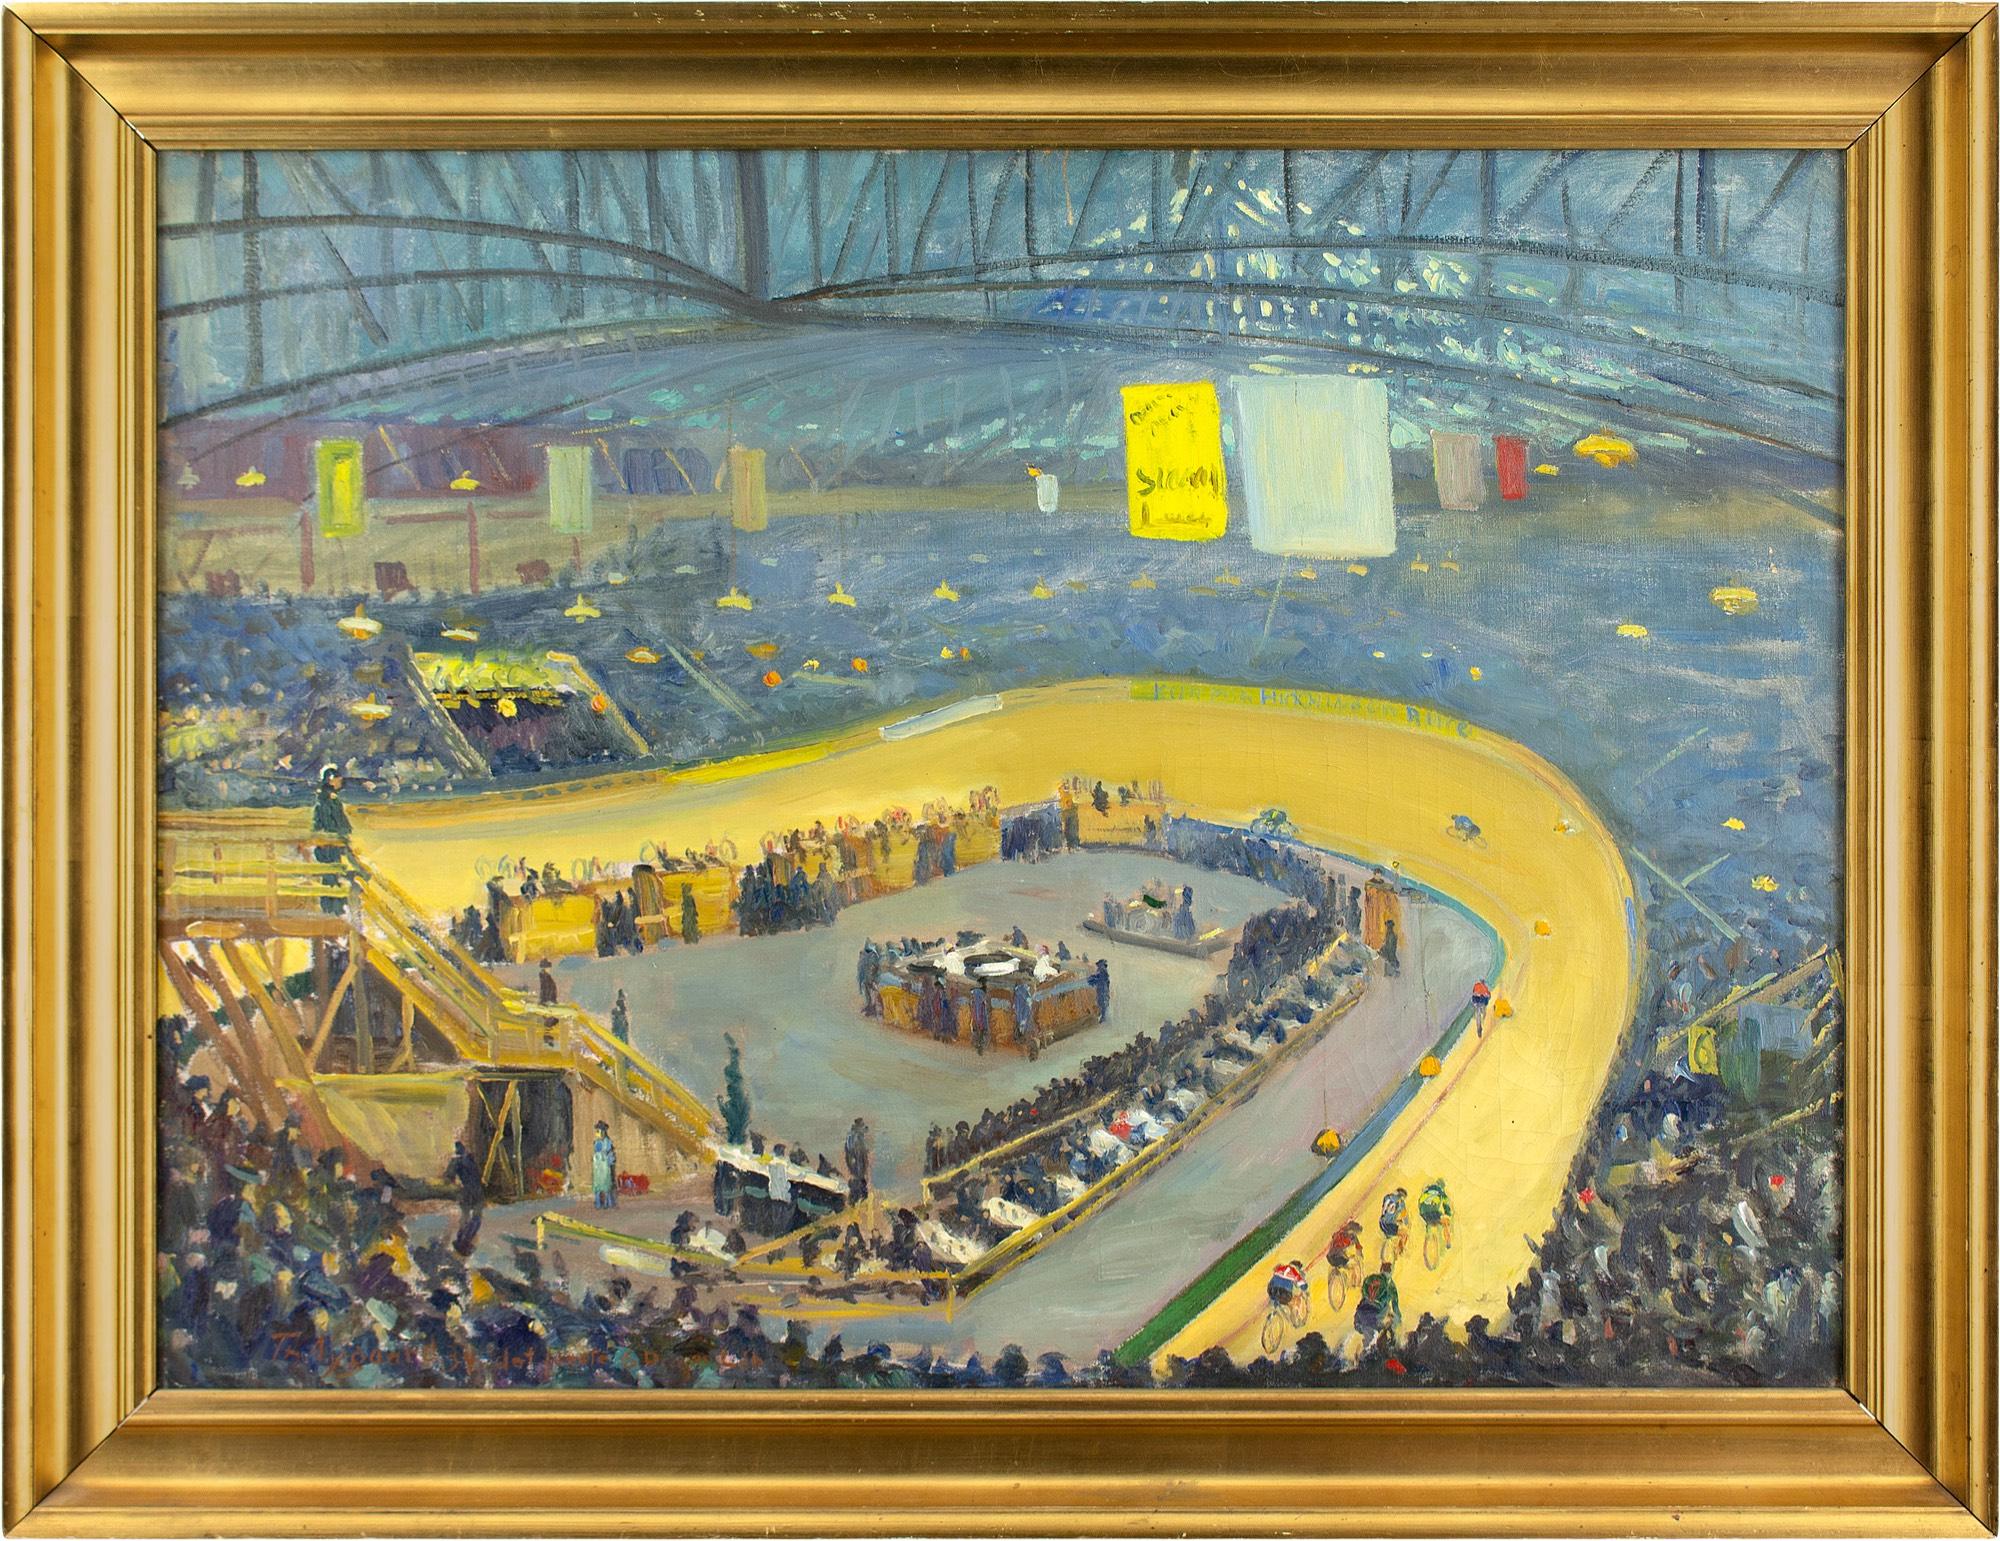 This exhilarating oil painting by Thorvald Nygaard (1892-1973) depicts the first ‘Six-Day Race’ in Denmark, which was held at the Forum København. It’s a spirited work abundant with vibrancy, drama and life.

The Six-Day Race dates back to 1875 with